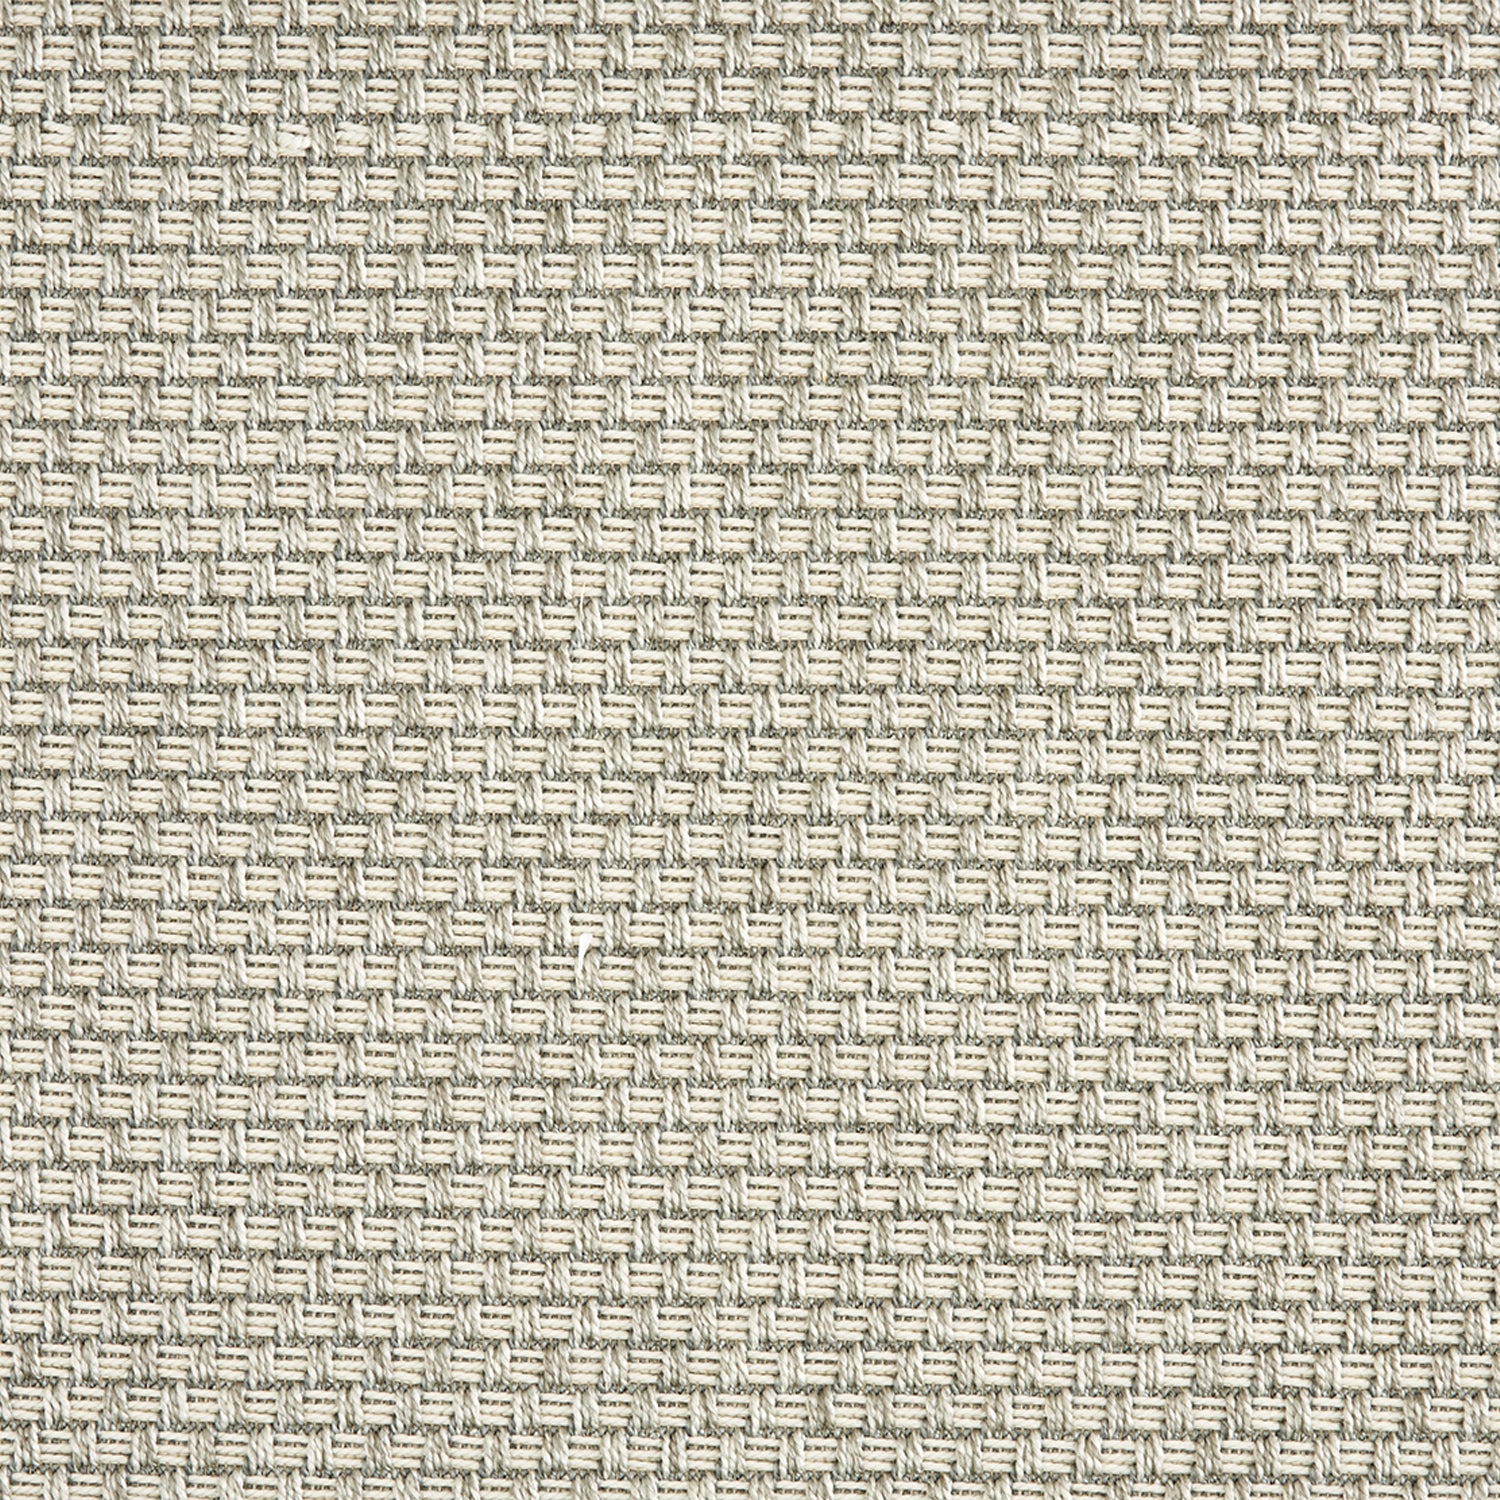 Outdoor broadloom carpet swatch in a flat grid weave in silver and cream.